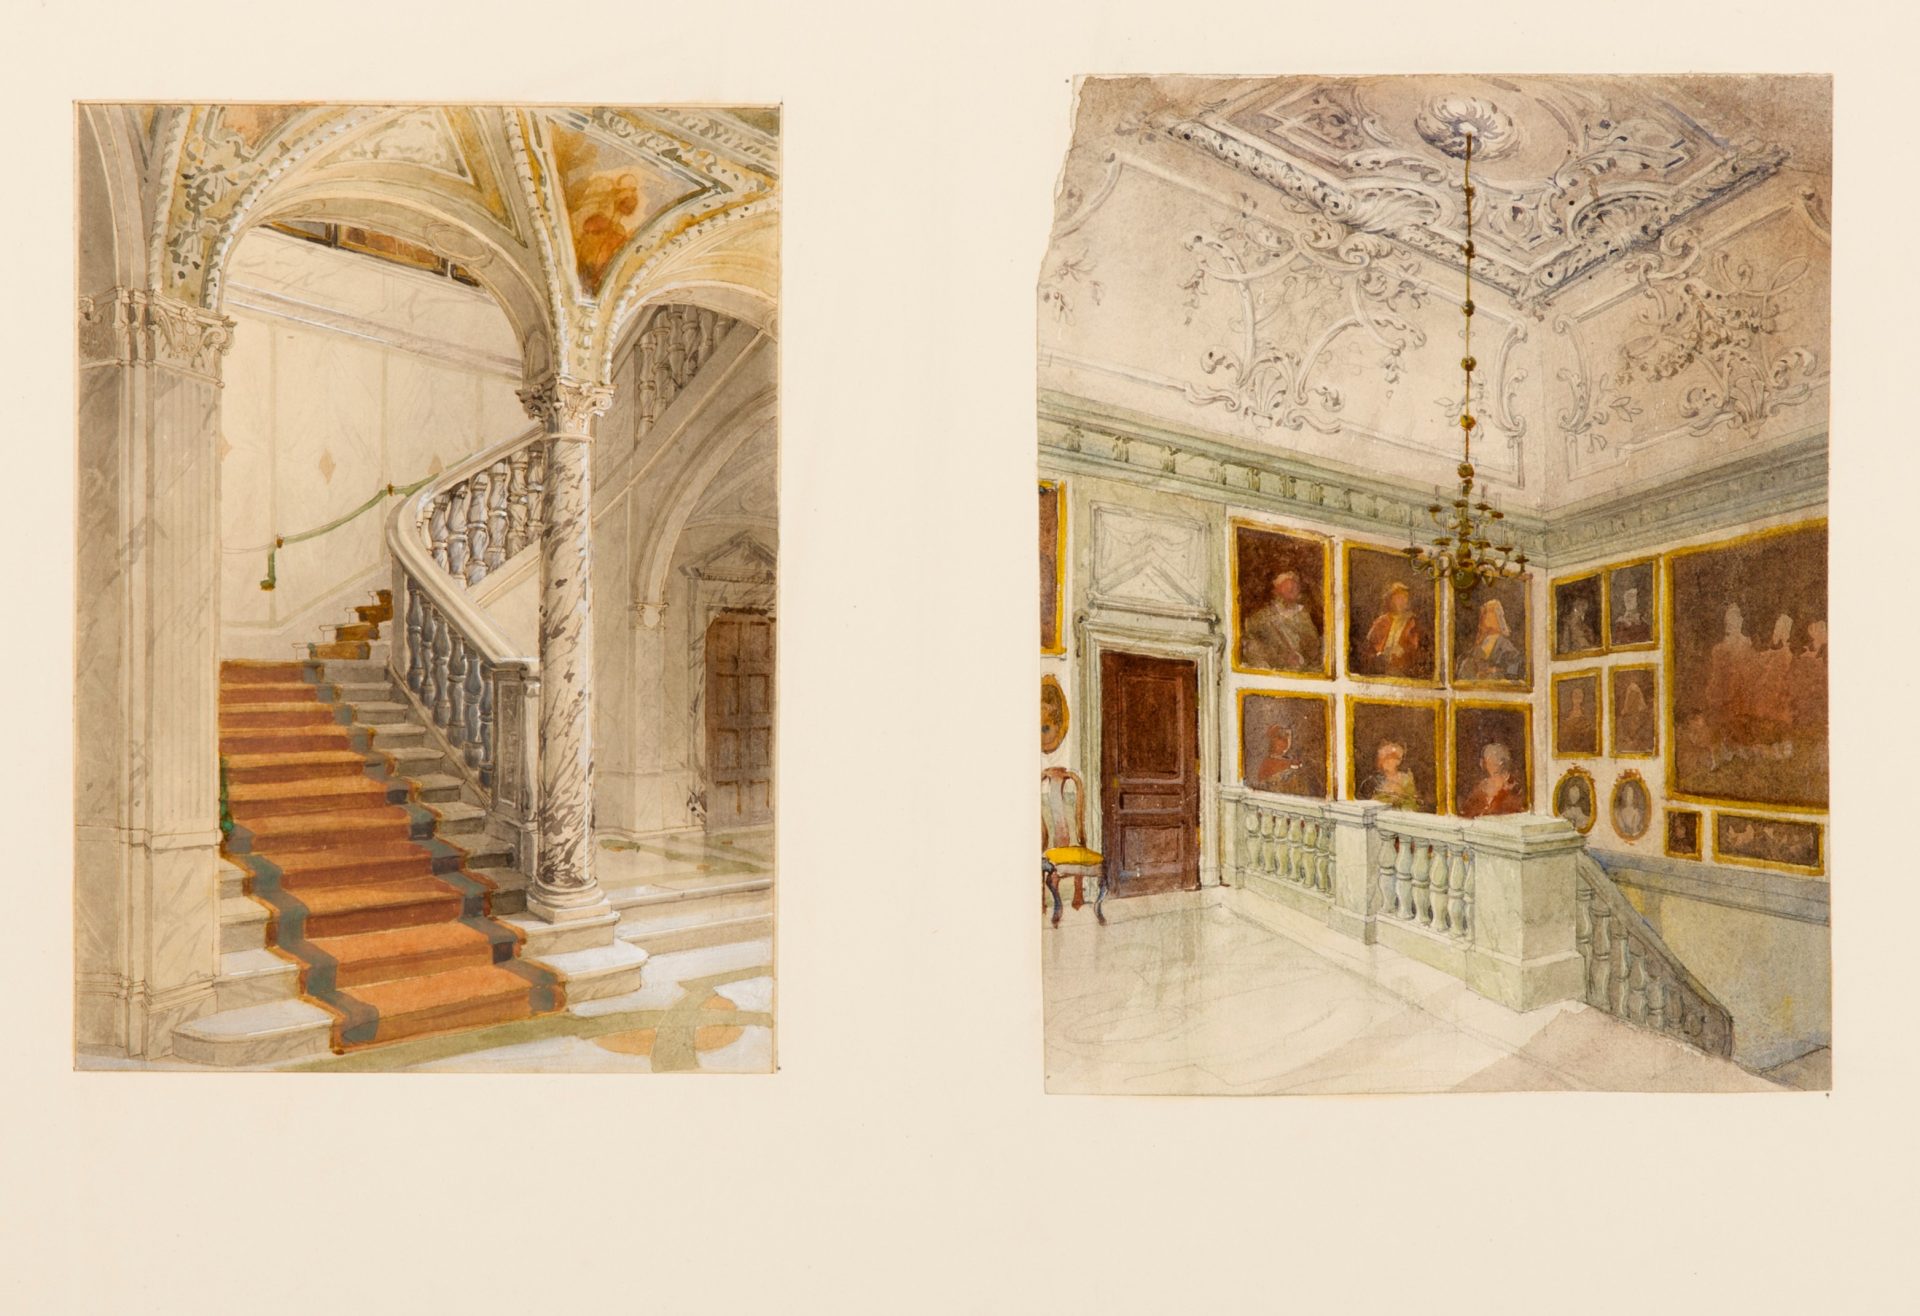 A view of Water colour drawings of the Upper and Lower Vestibule.